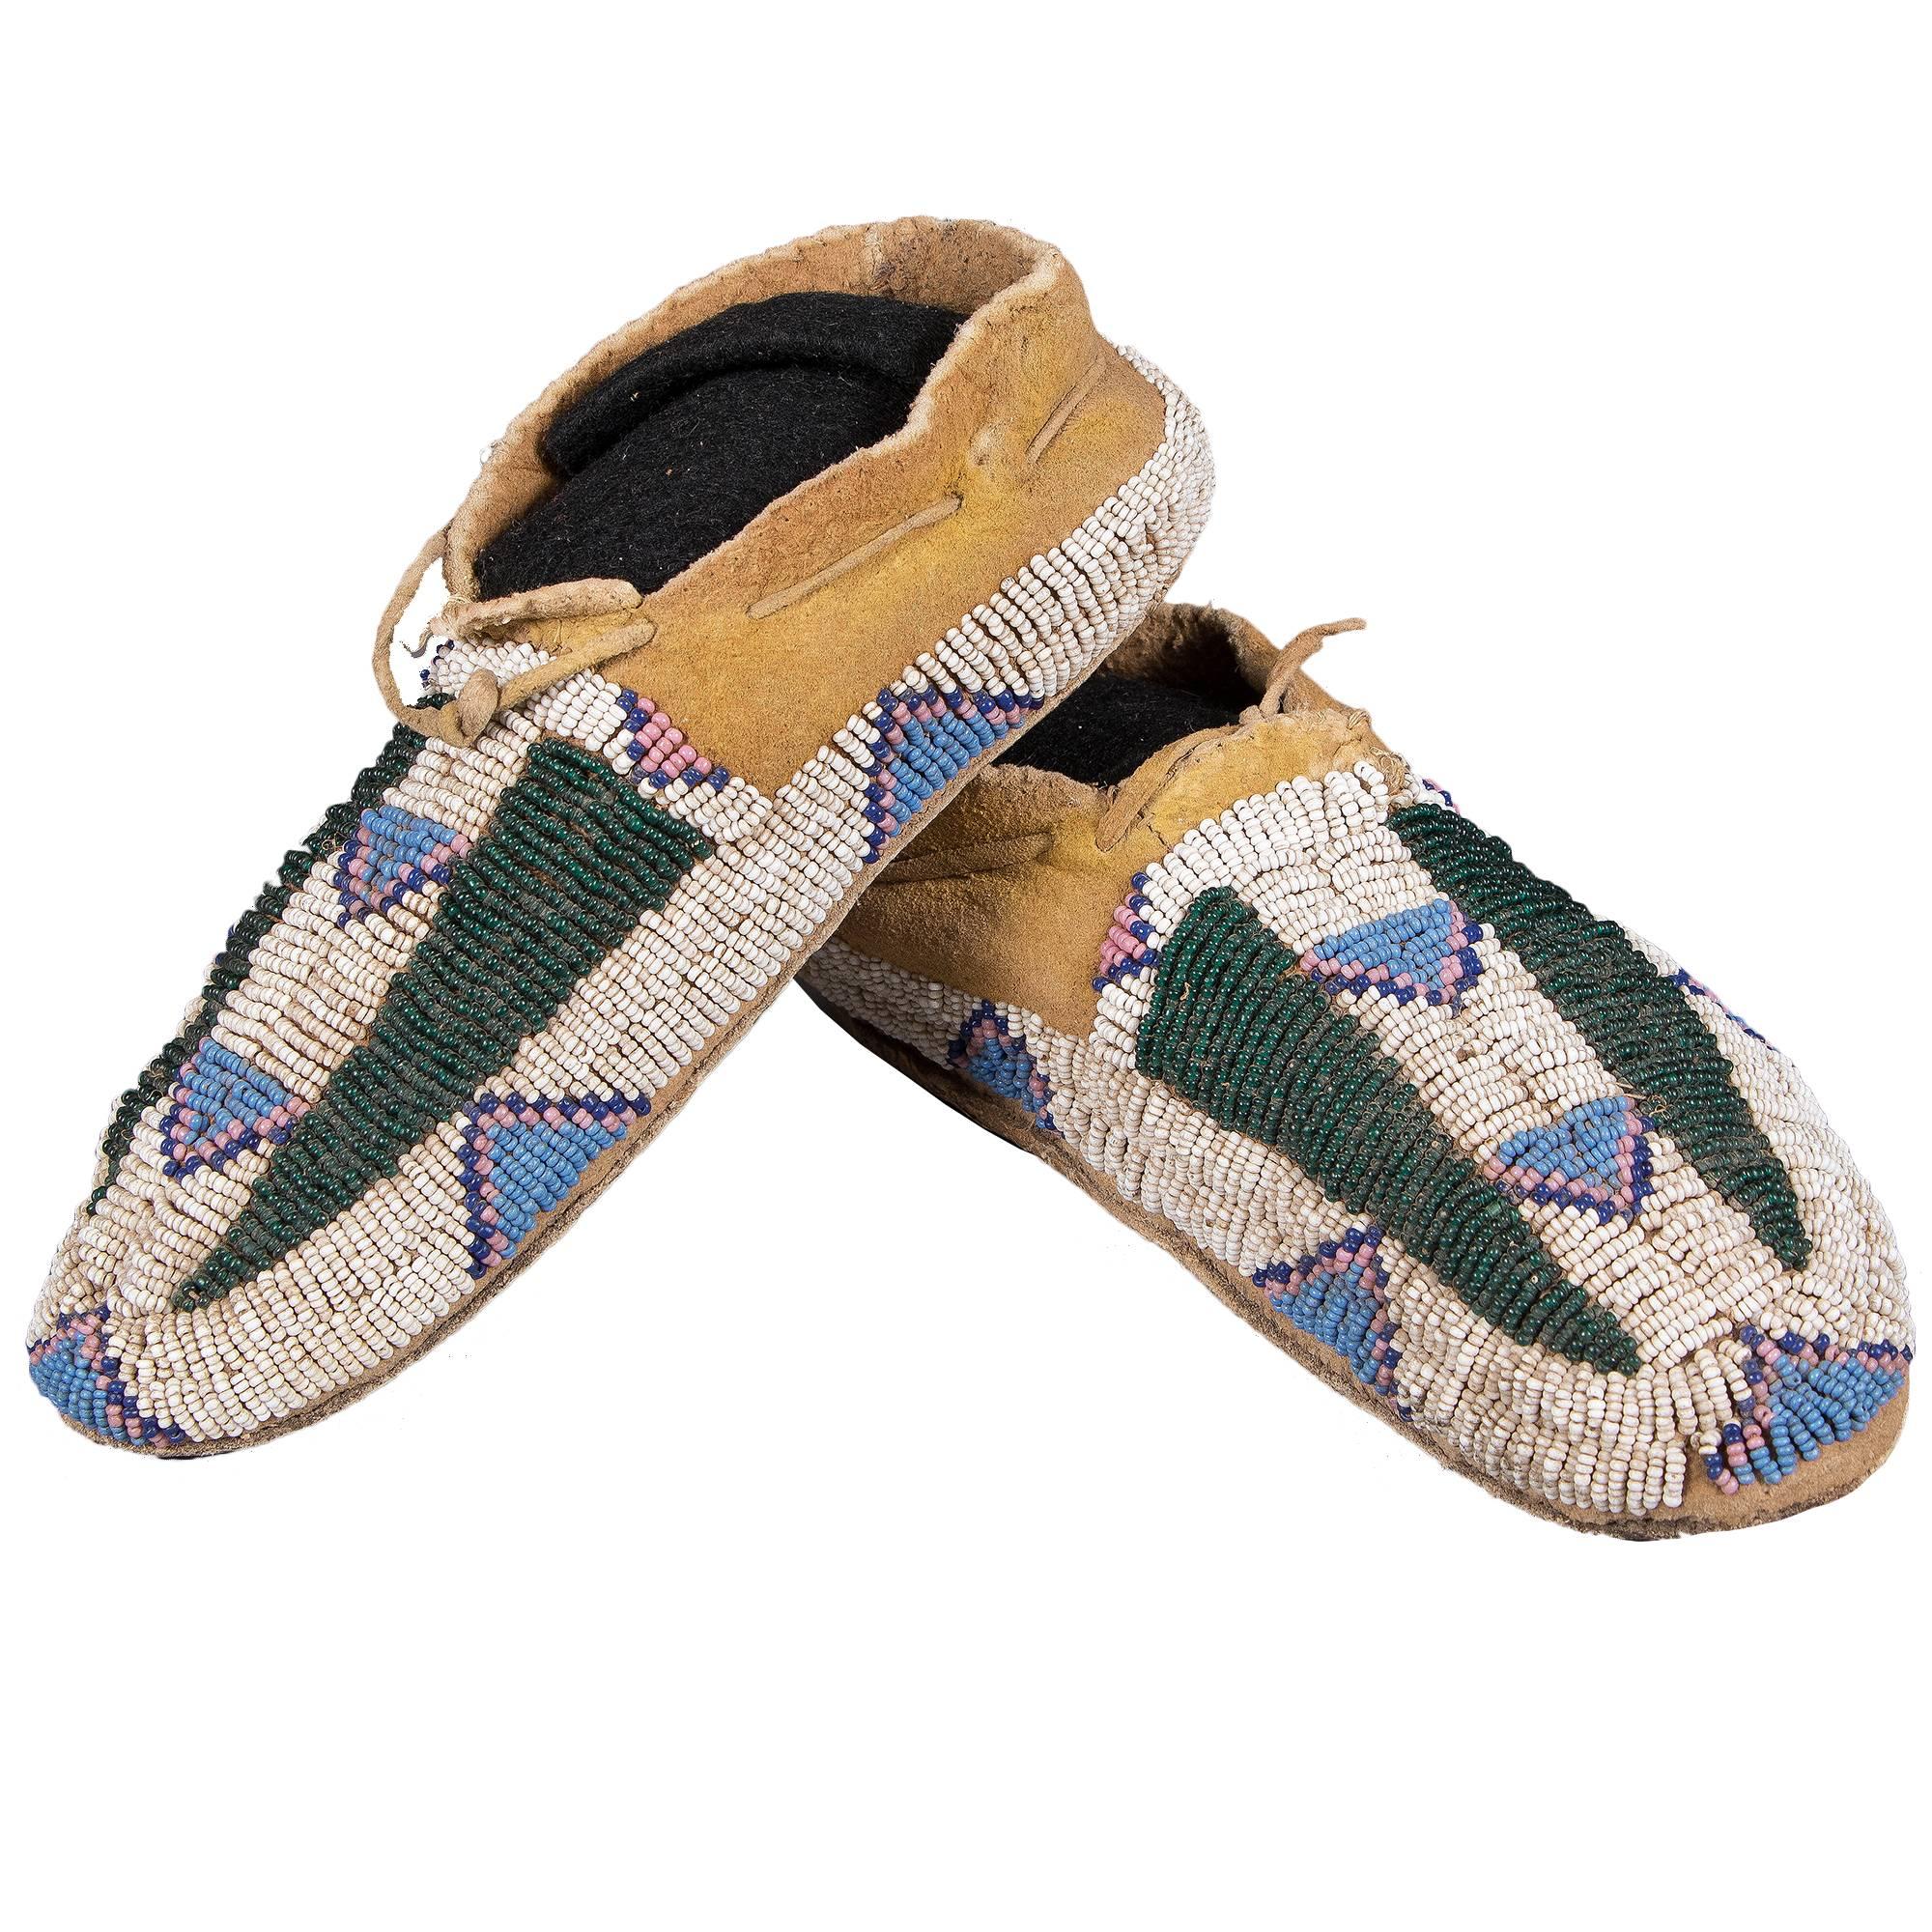 Antique Native American Beaded Child's Moccasins, Arapaho, 19th Century